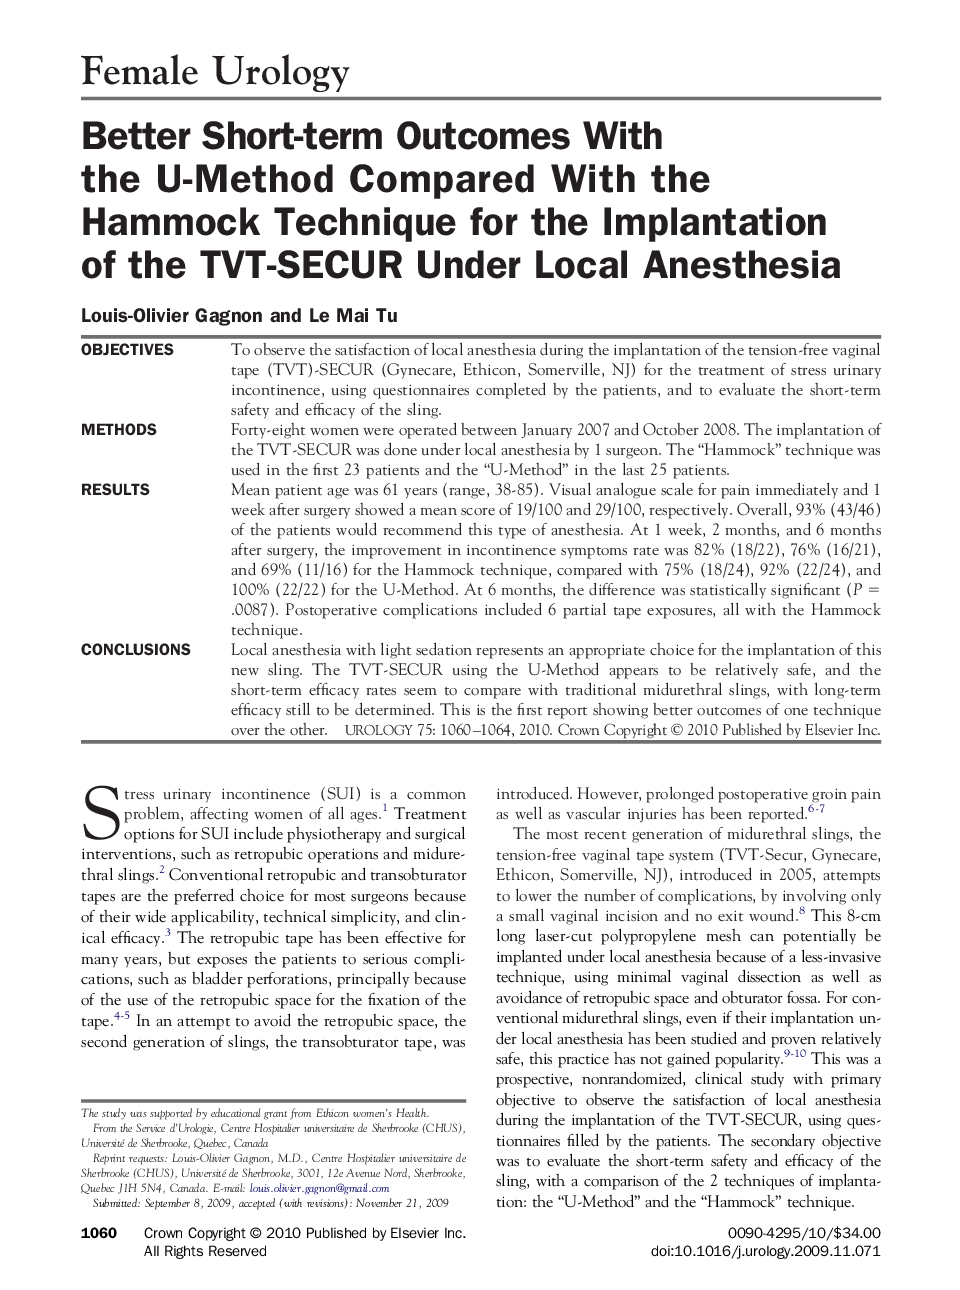 Better Short-term Outcomes With the U-Method Compared With the Hammock Technique for the Implantation of the TVT-SECUR Under Local Anesthesia 